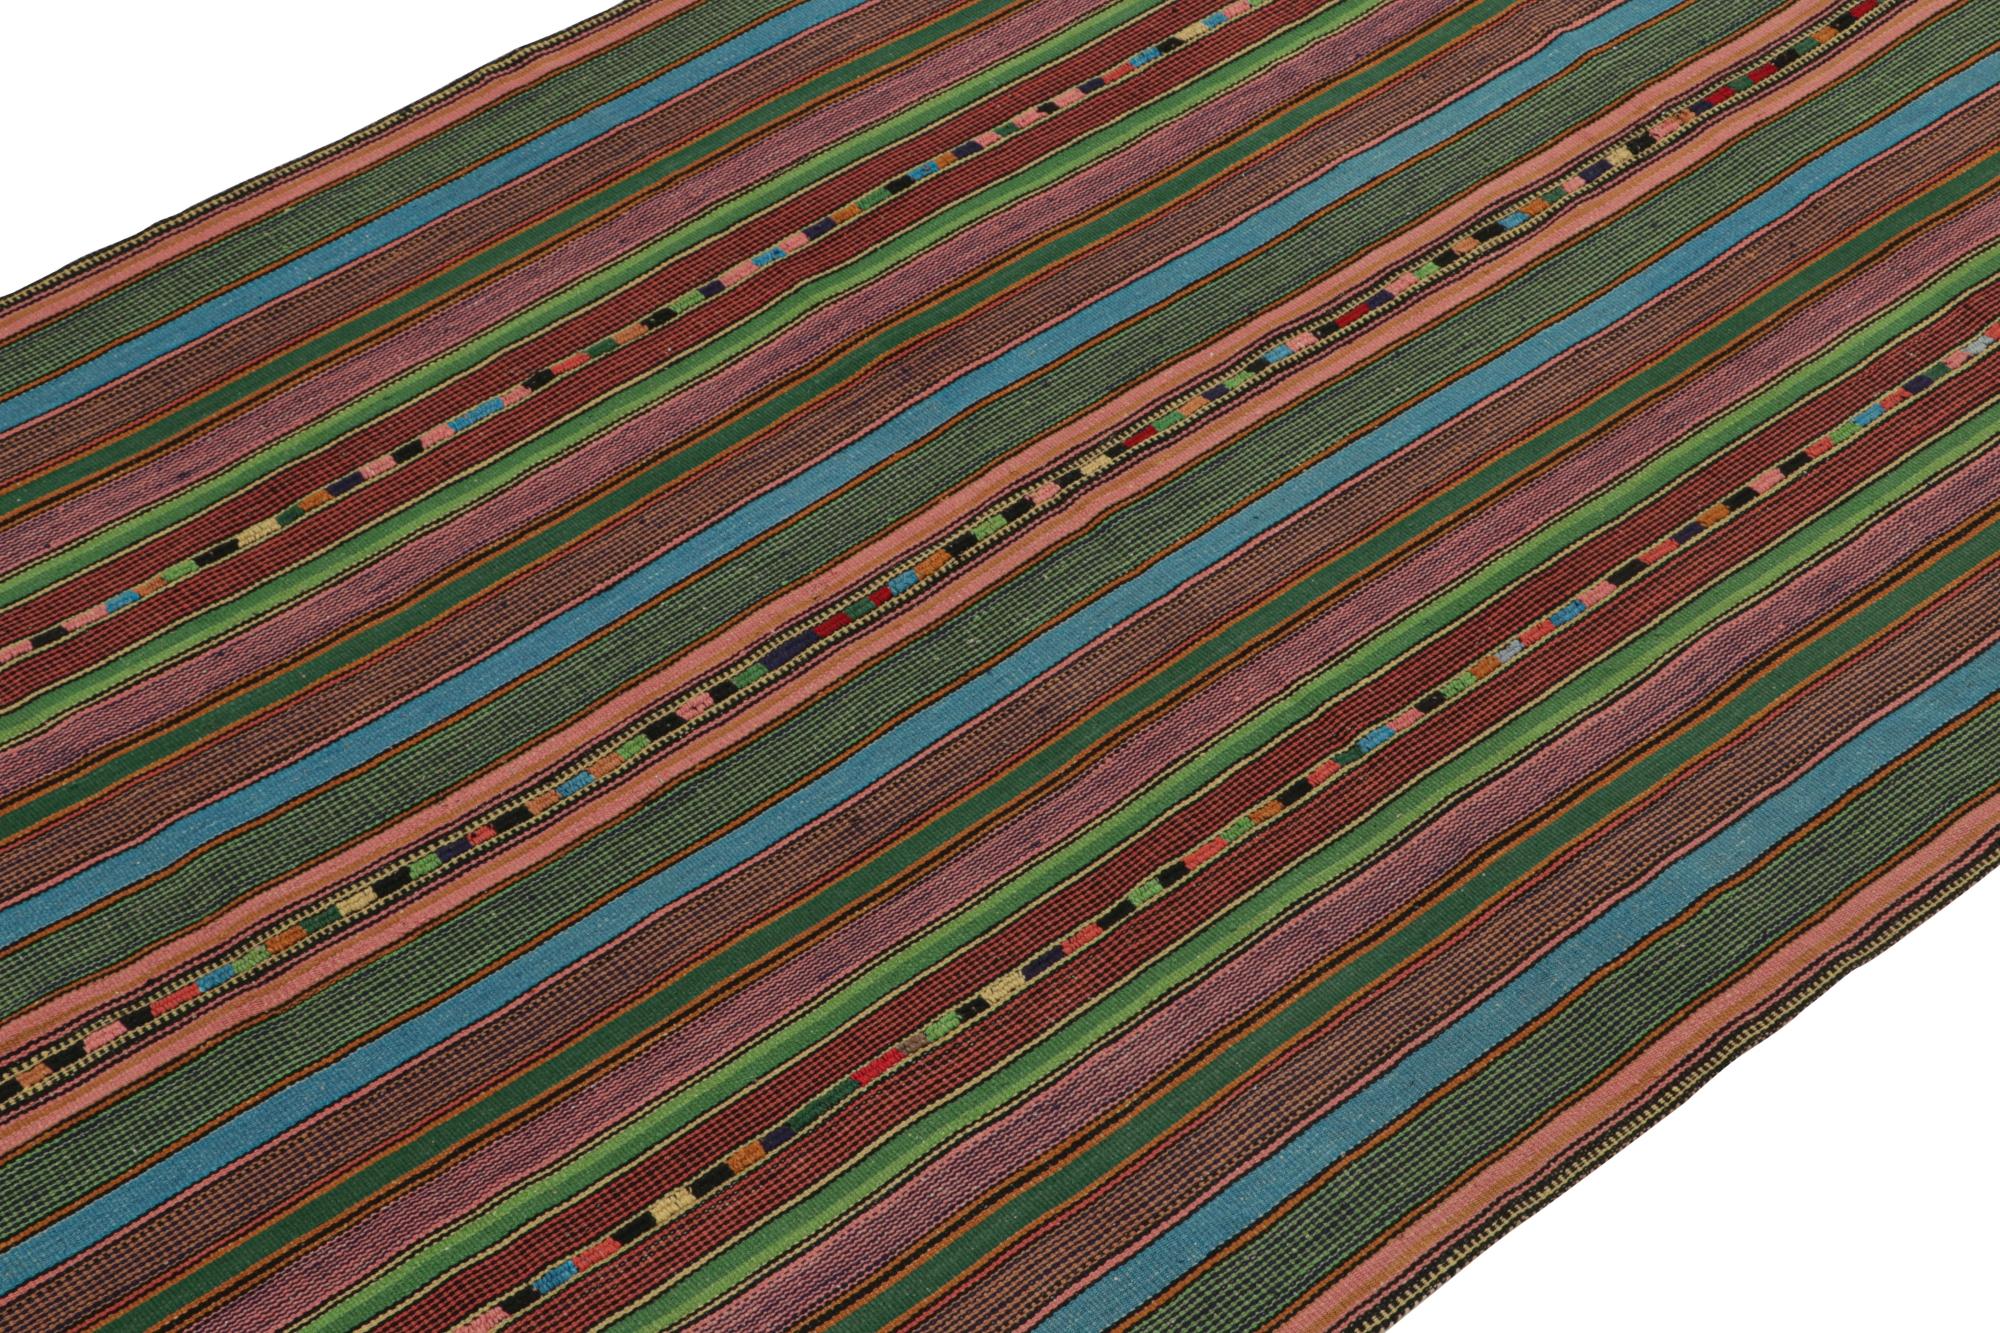 This vintage 6x11 Persian Kilim from Kurdistan employs the distinct “palas” weaving technique. 

On the Design:

Handwoven in wool, the pattern enjoys red, blue & green stripes for a bold sense of movement. Connoisseurs may admire the rustic